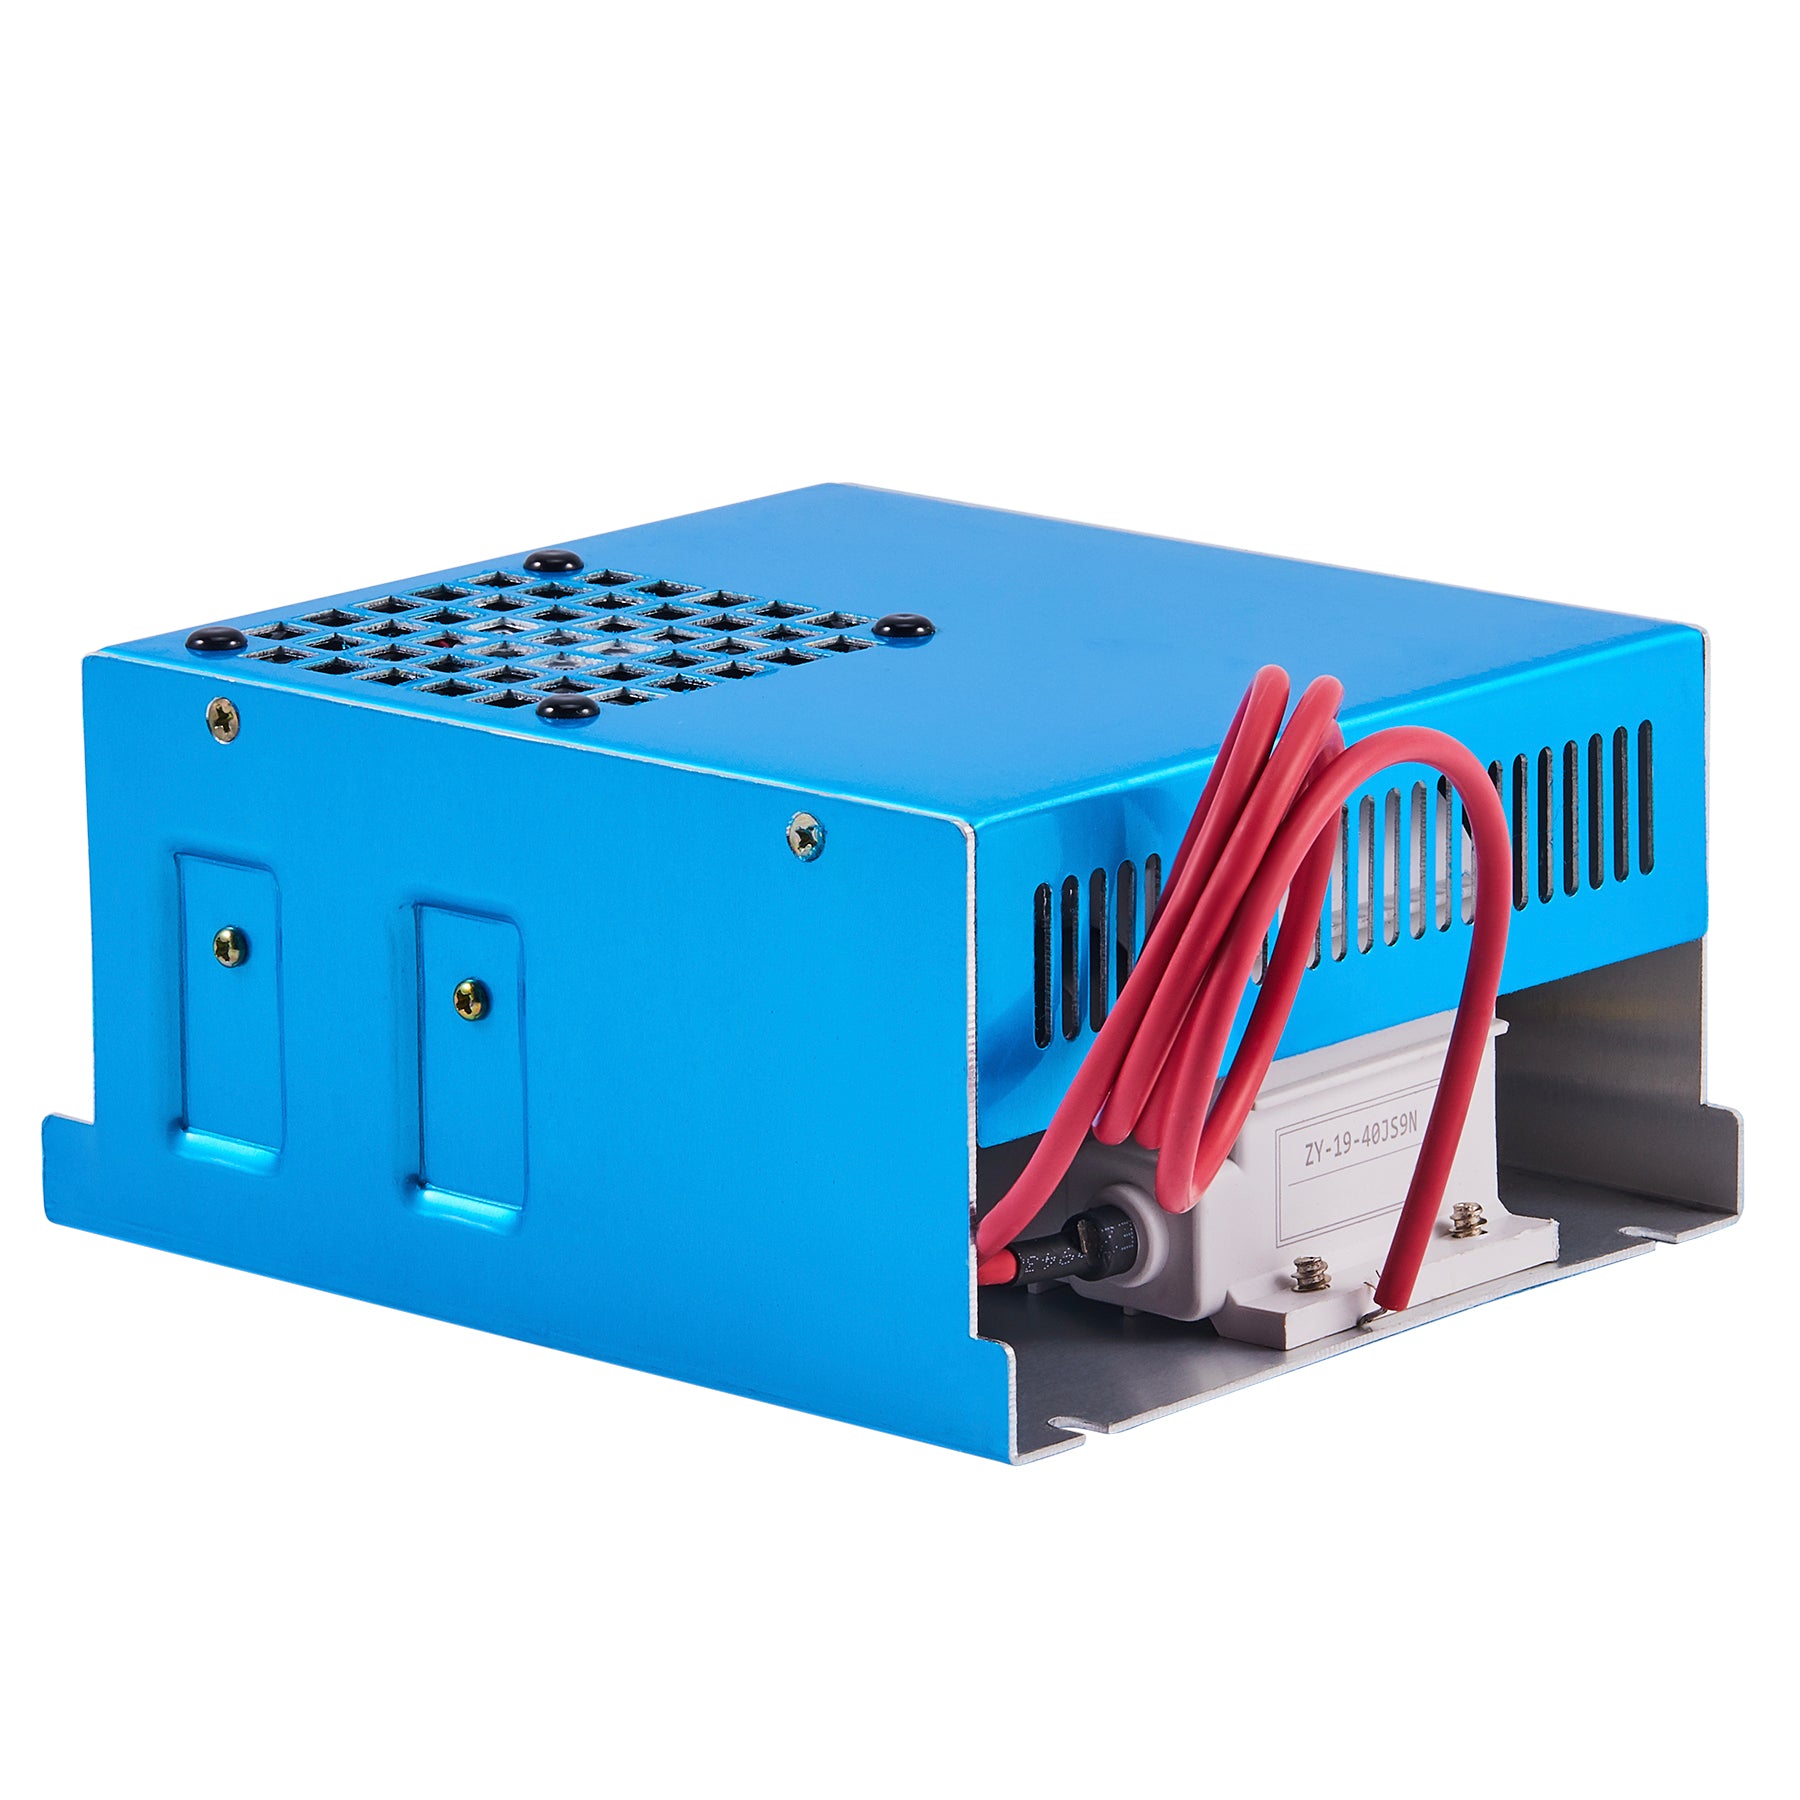 40W Laser Power Supply for CO2 Laser Engraver Cutting Machine | LN-40